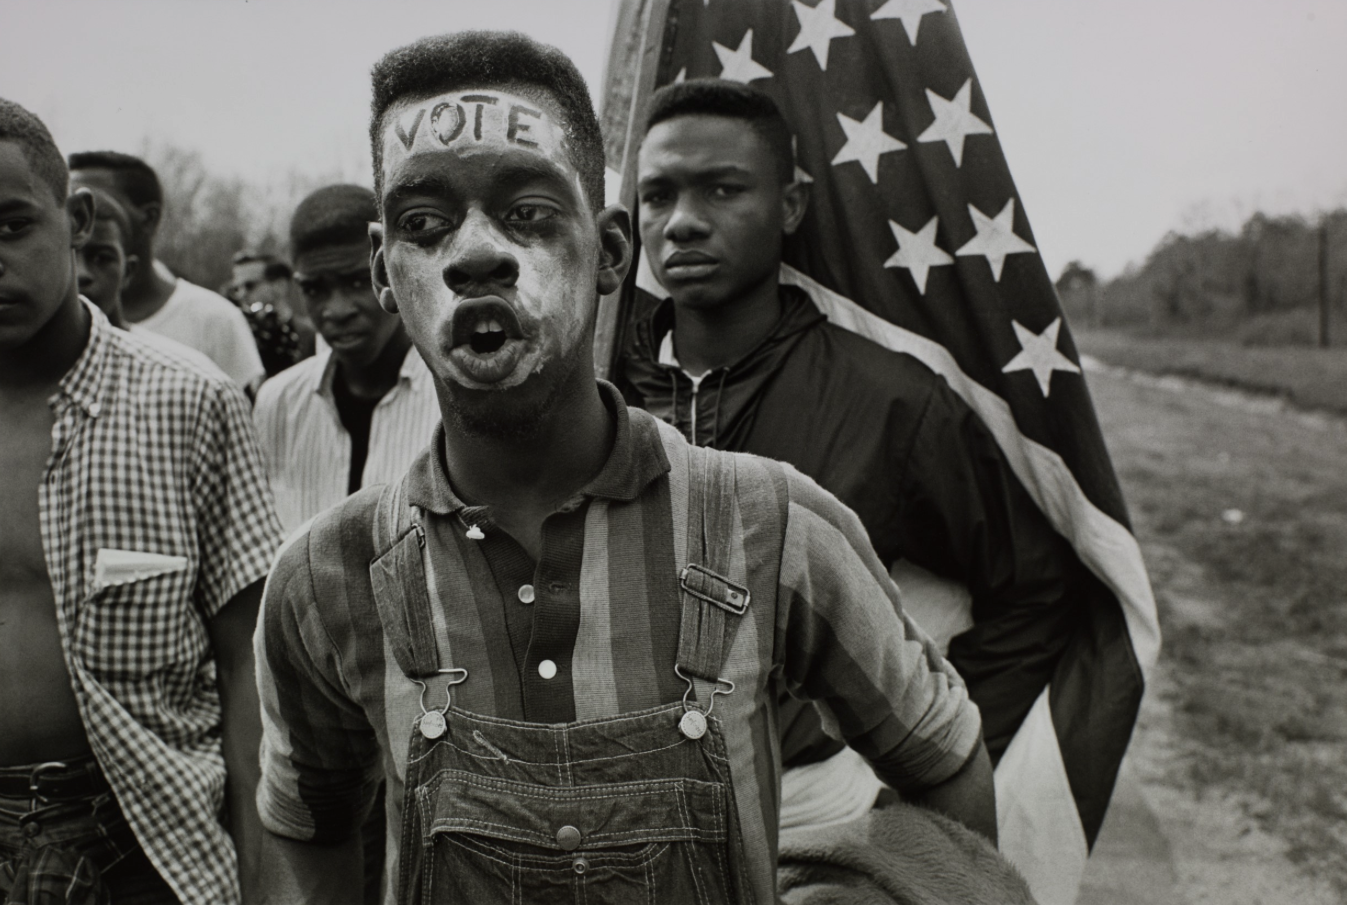   Bruce Davidson  United States, born 1933   Time of Change (Young Man with "Vote" painted on his forehead walking in the Selma March, Alabama) , 1965 gelatin silver print, 16 x 20 inches Promised Gift from the Judy Glickman Lauder Collection, 8.2021